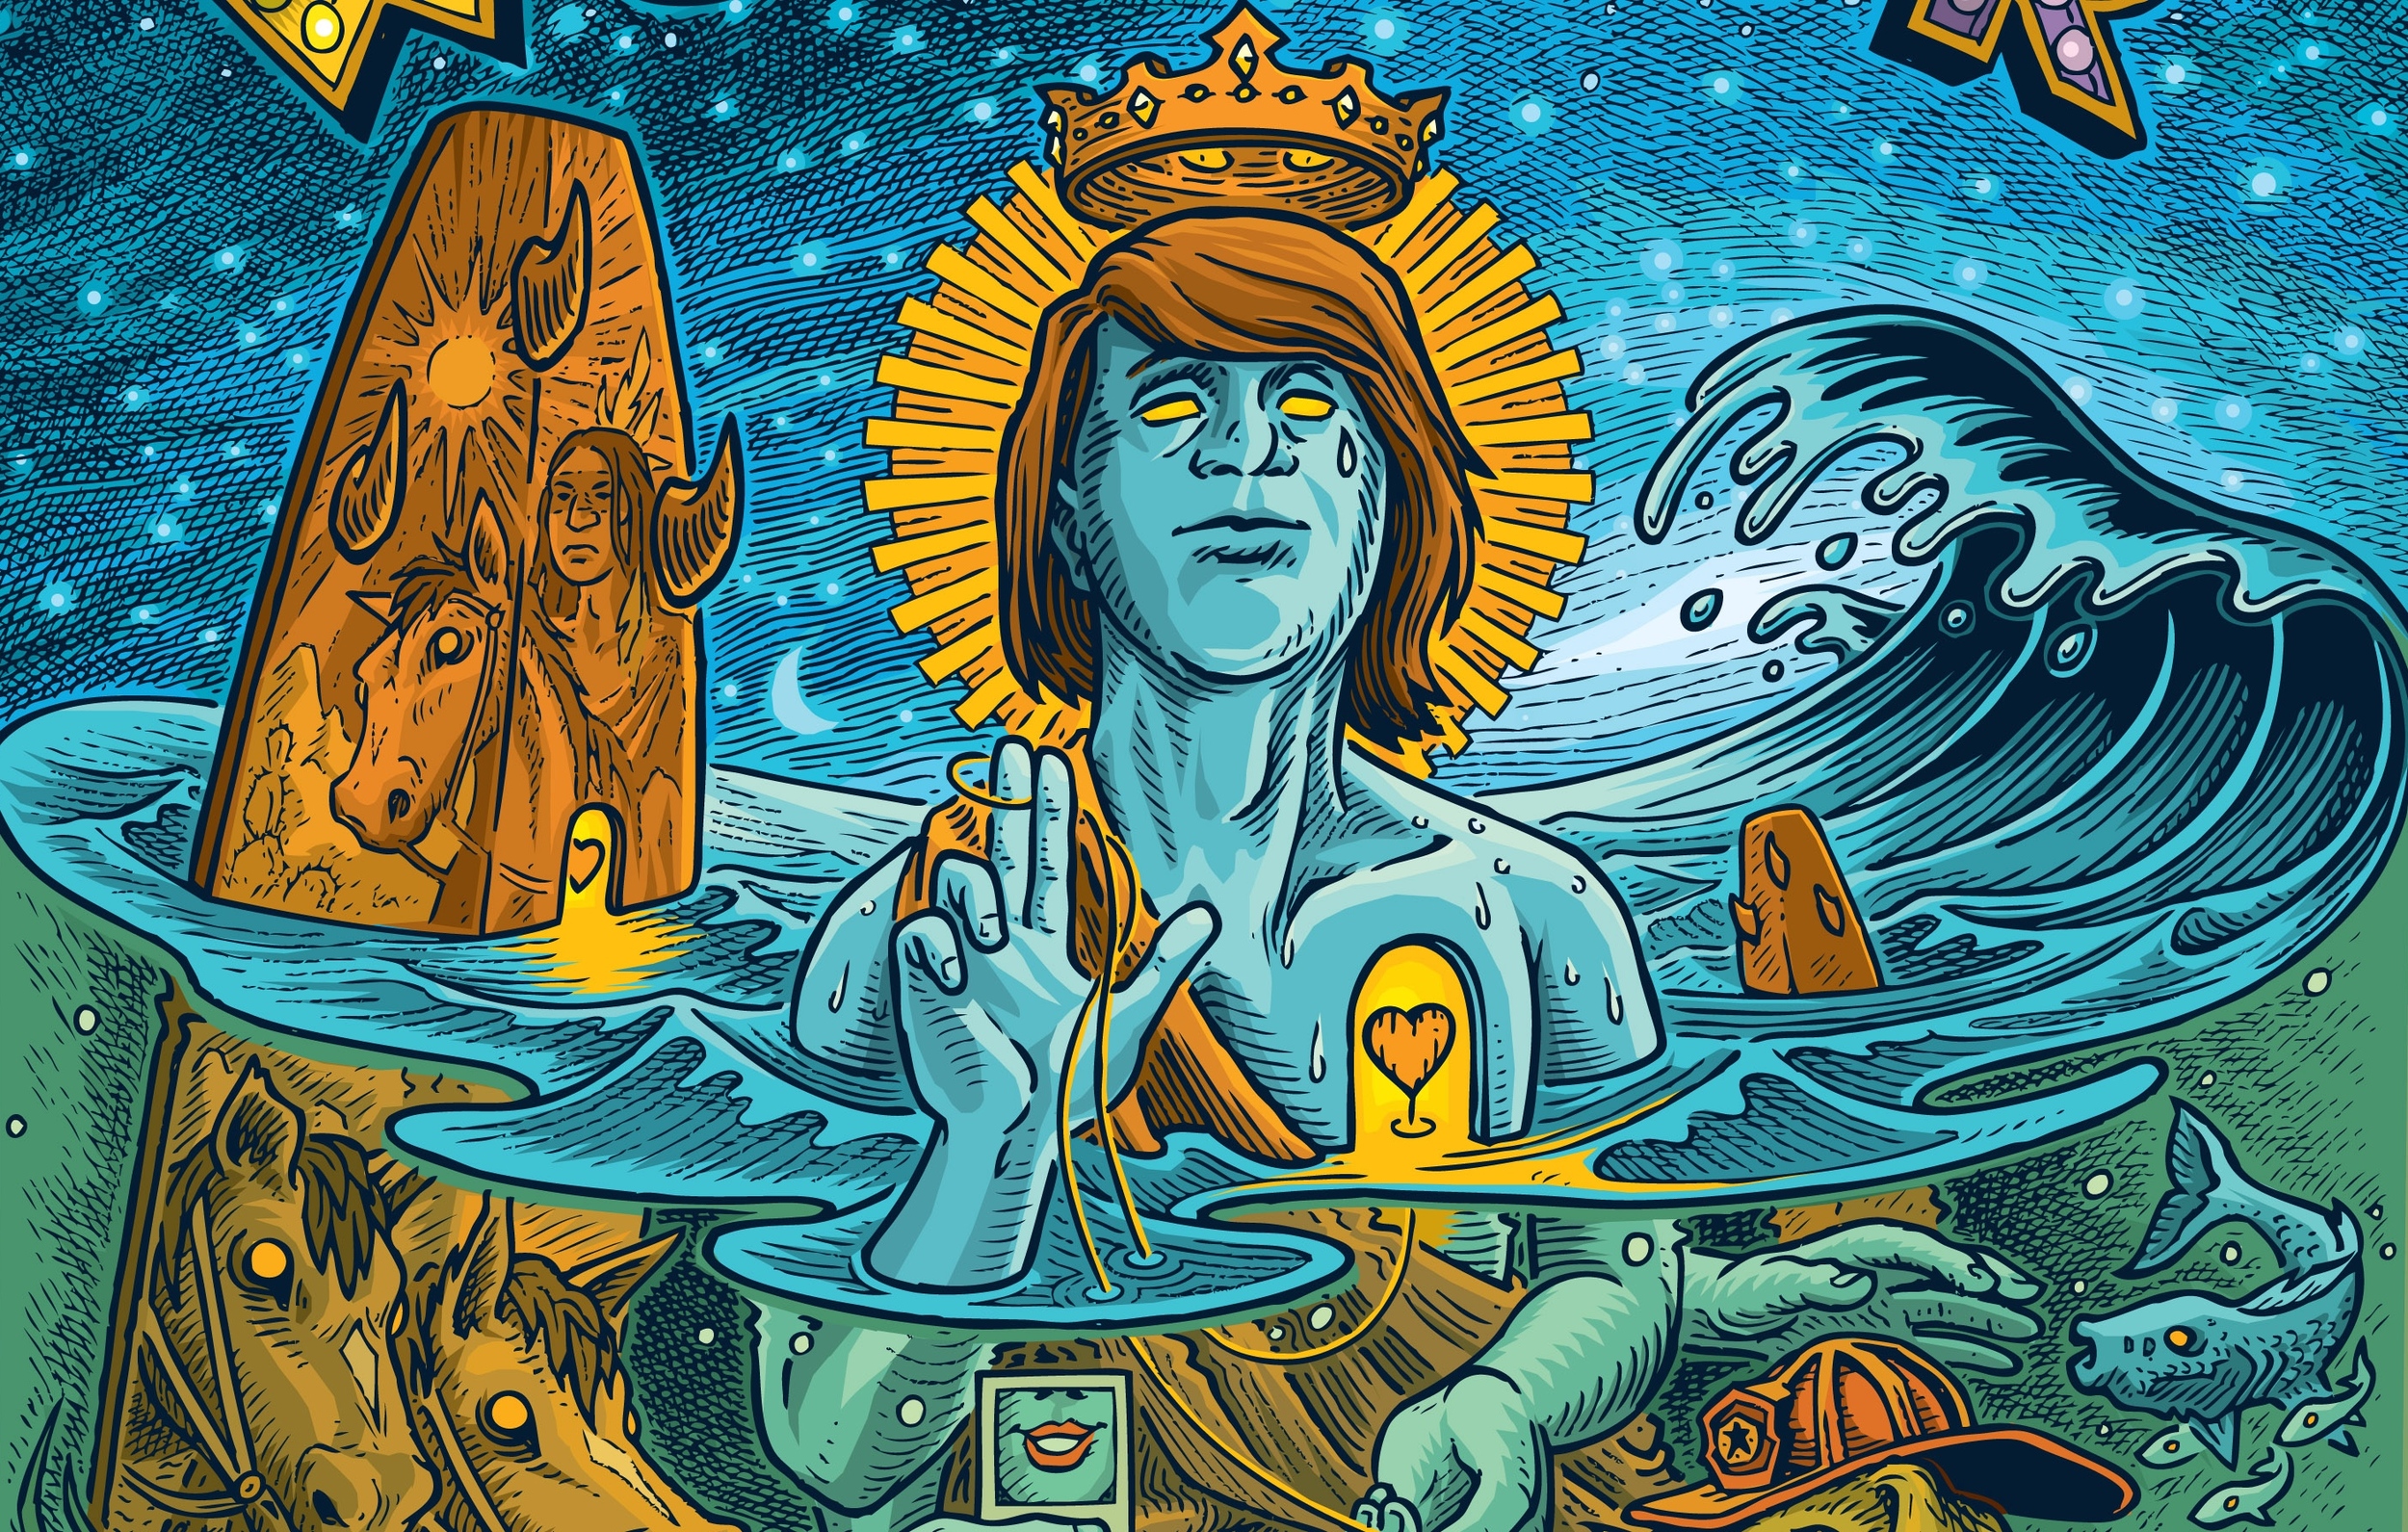 Brian Wilson tribute show poster (detail)